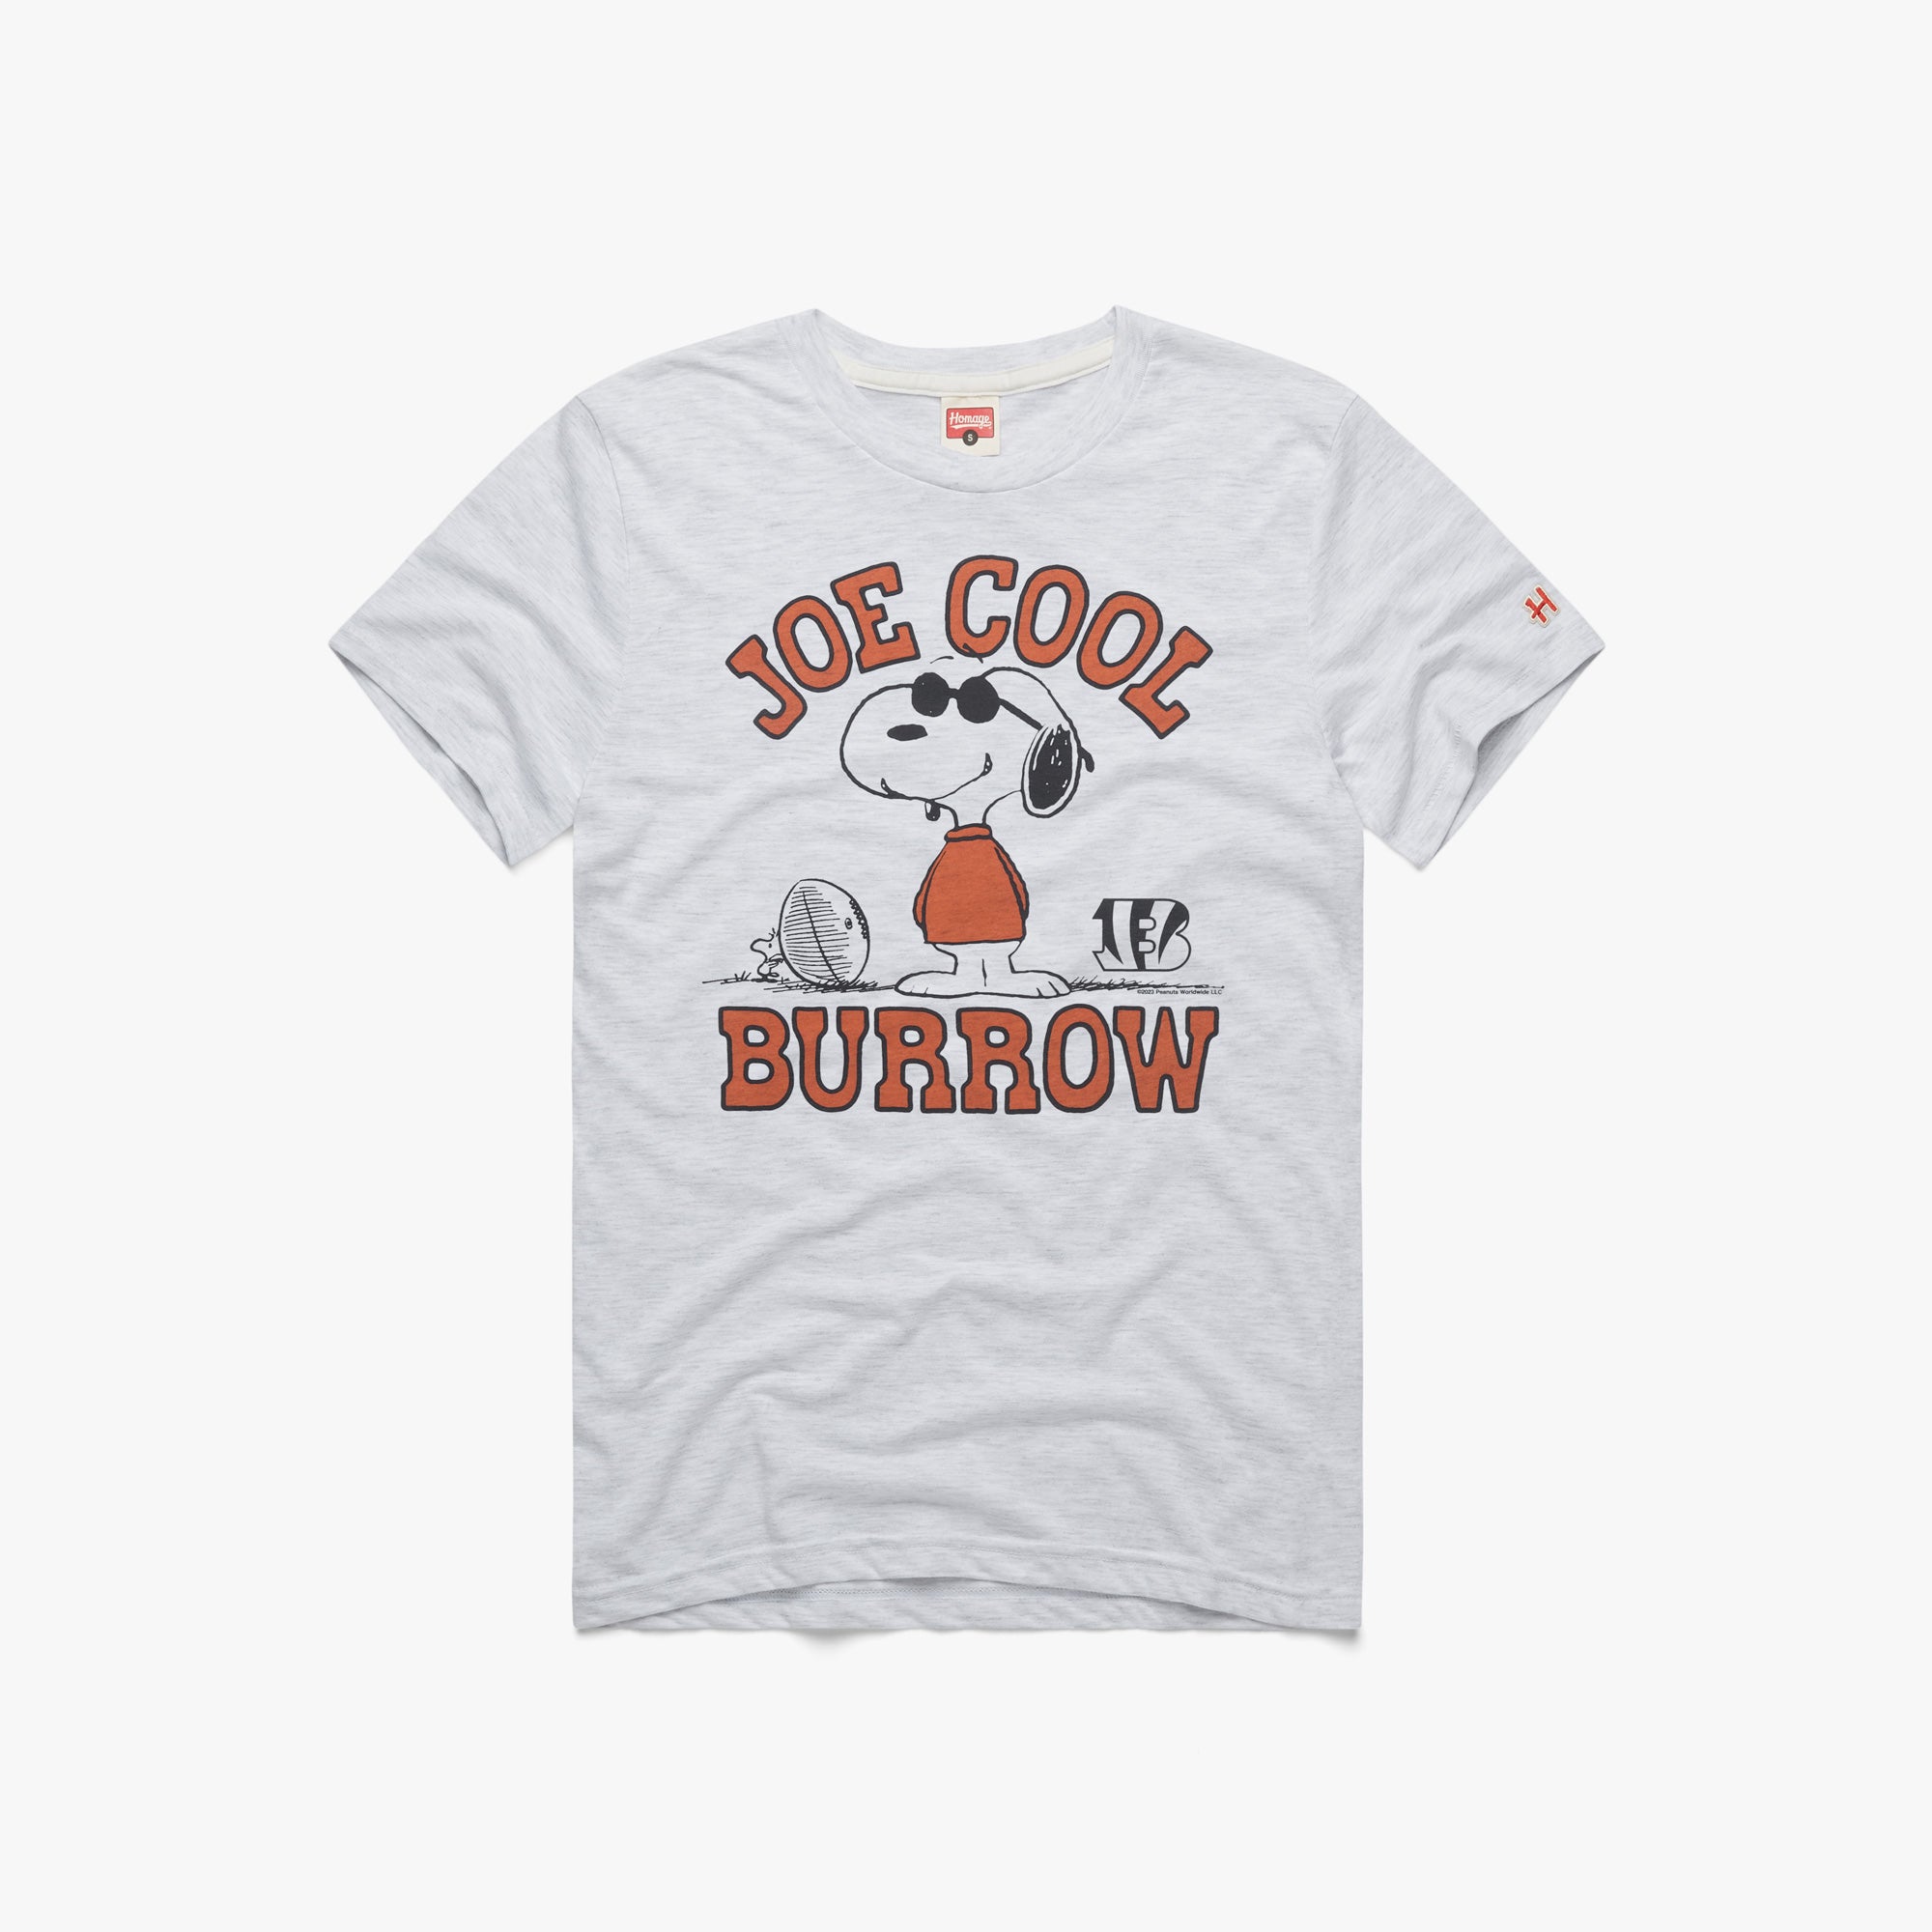 Peanuts x Cincinnati Bengals Joe Cool Burrow T-Shirt from Homage. | Officially Licensed Vintage NFL Apparel from Homage Pro Shop.